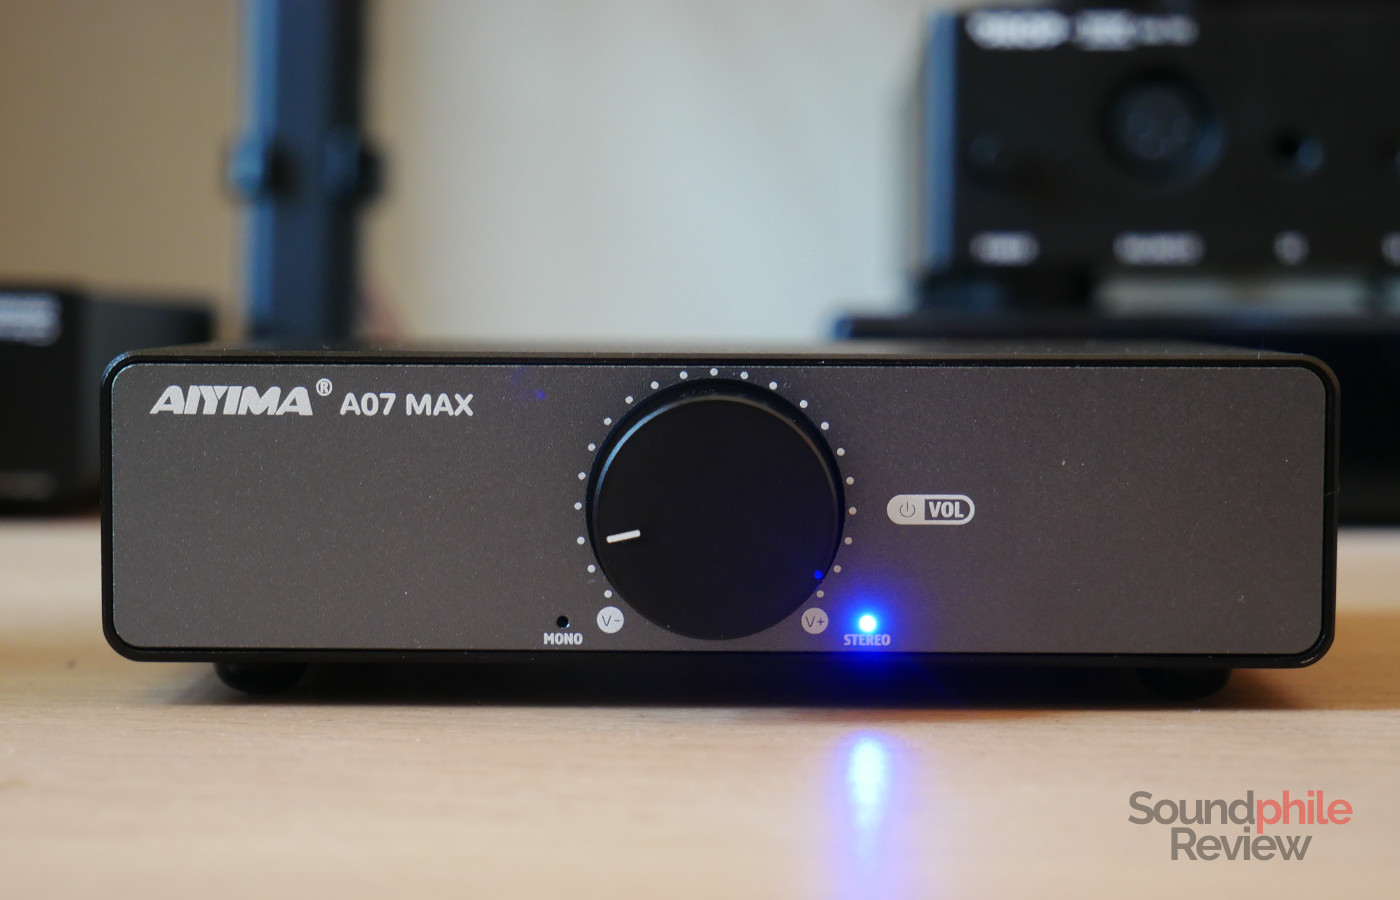 The front of the AIYIMA A07 MAX hosts the volume knob